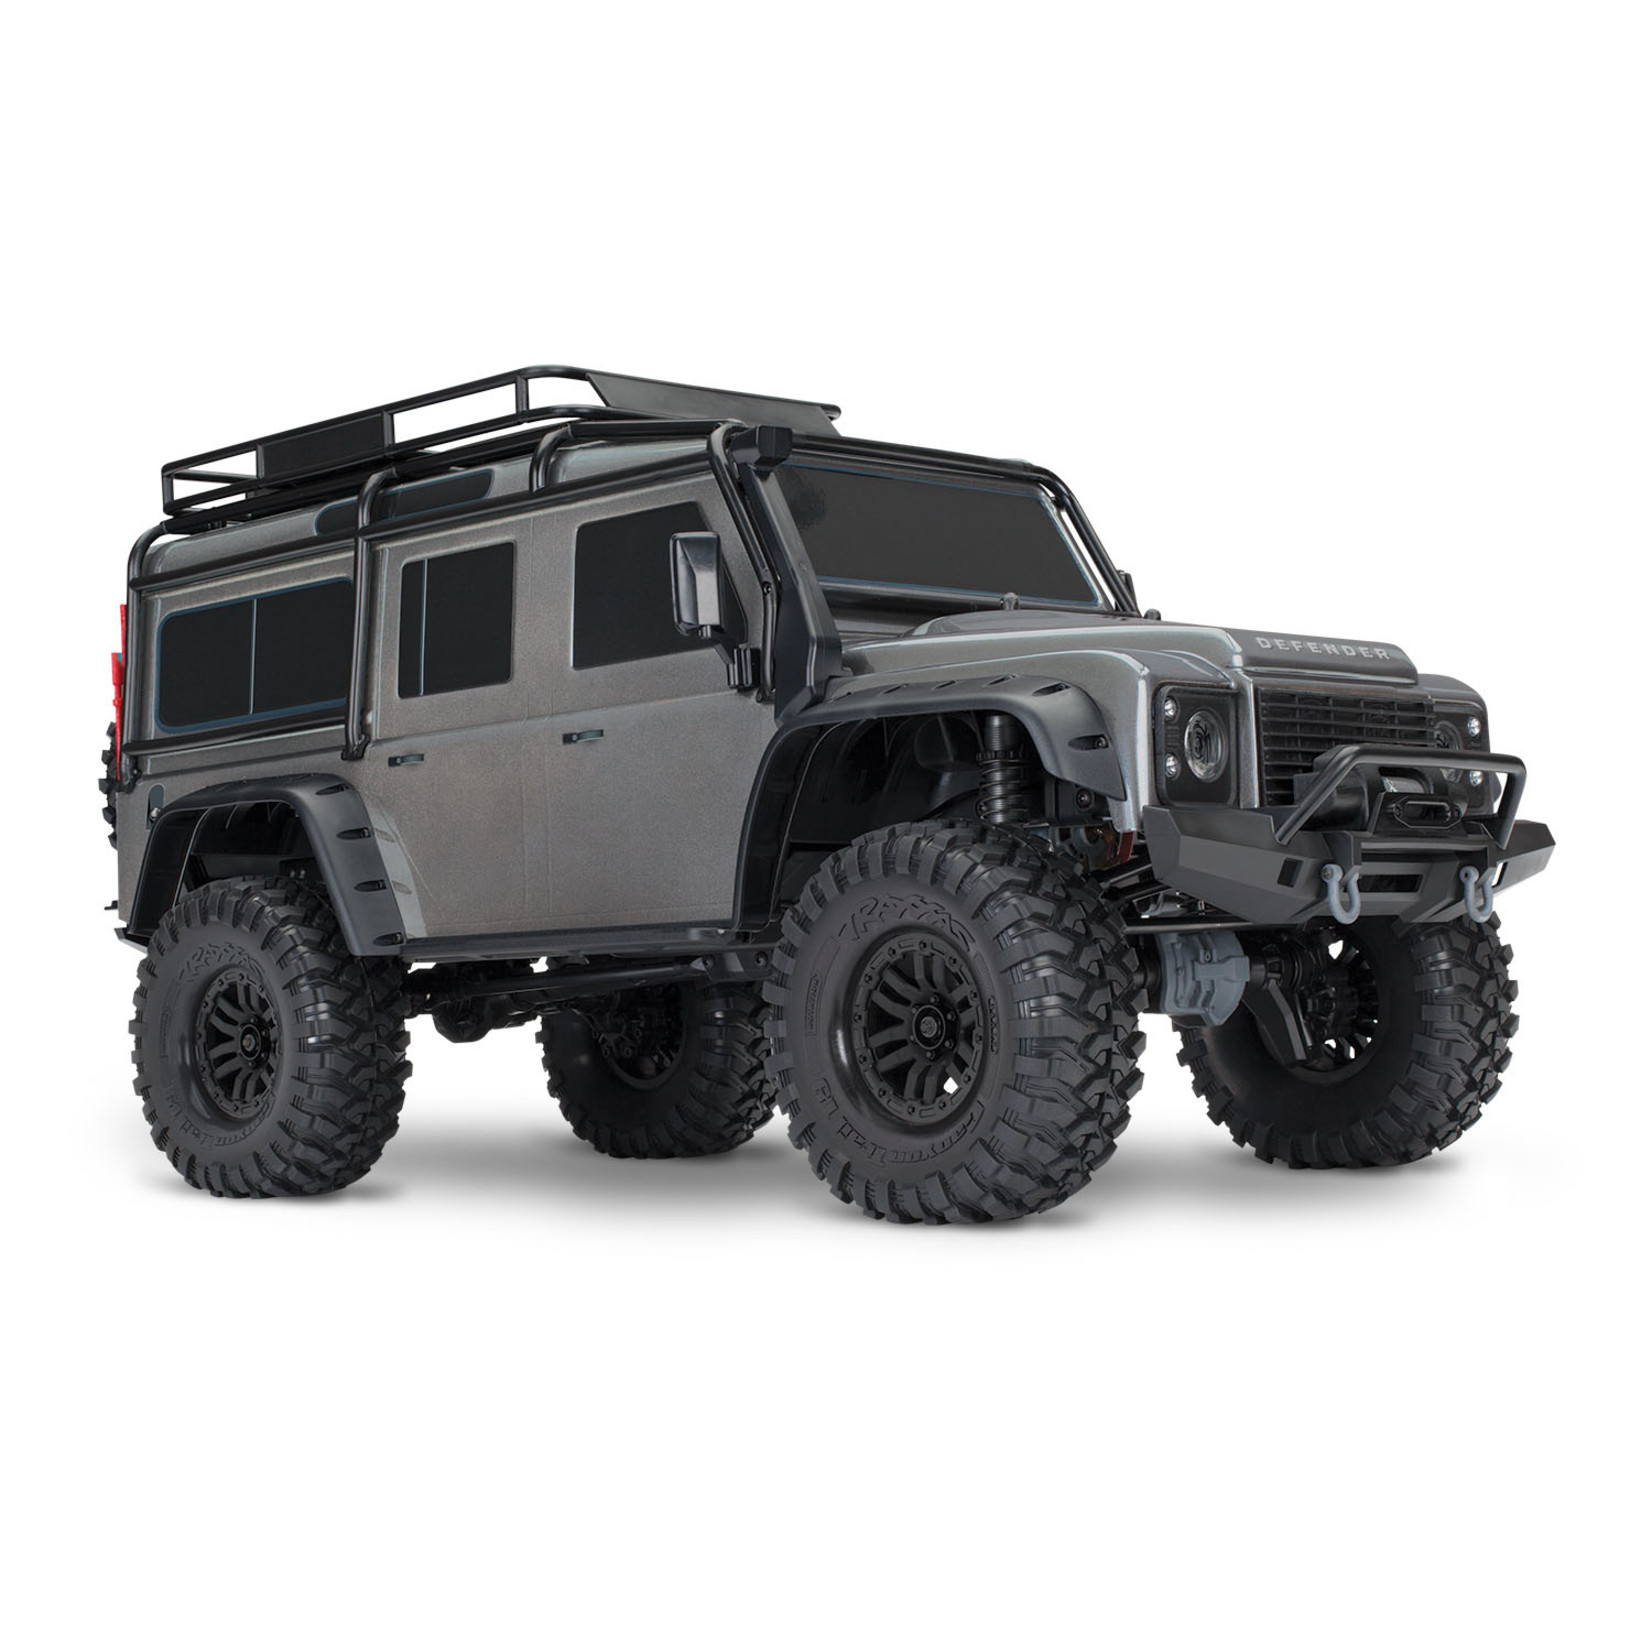 Traxxas TRX-4 Scale and Trail Crawler with Land Rover Defender Body: 1/10 Scale 4WD Electric Trail Truck